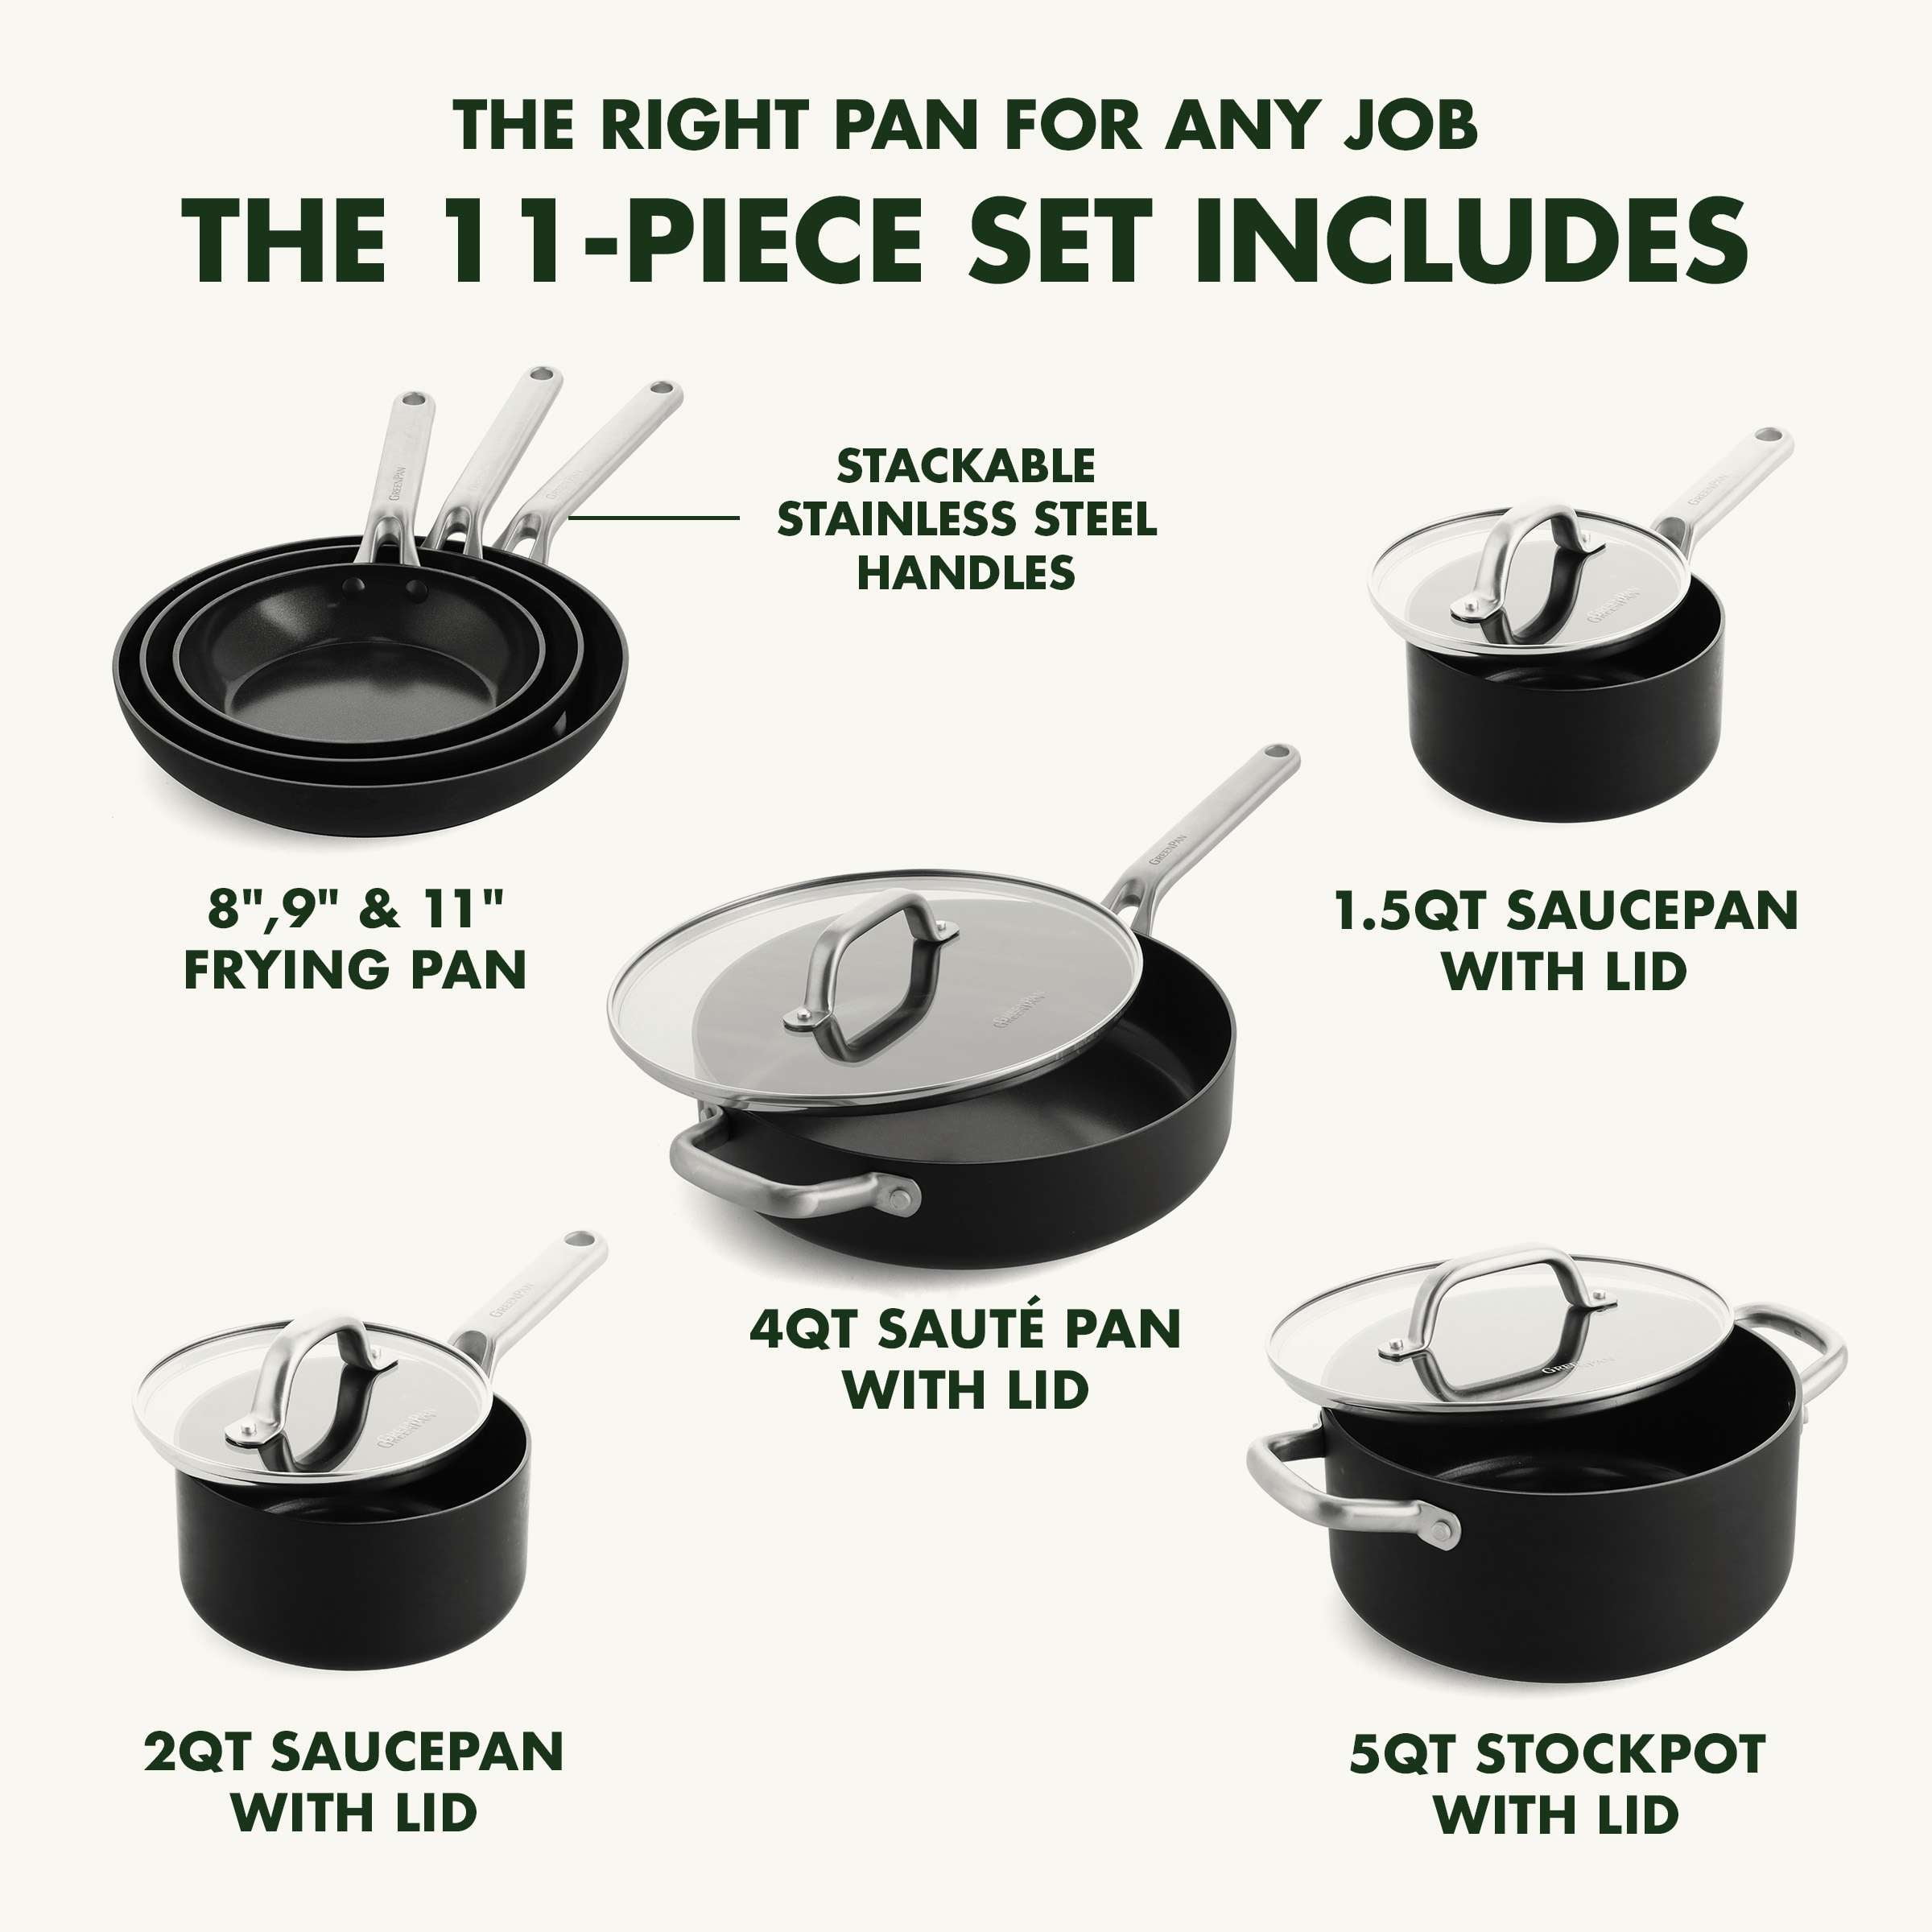 Healthy Non-Toxic PFAS Free Cookware Sets - Performance Pro Ceramic Nonstick 11-Piece Cookware Set by GreenPan